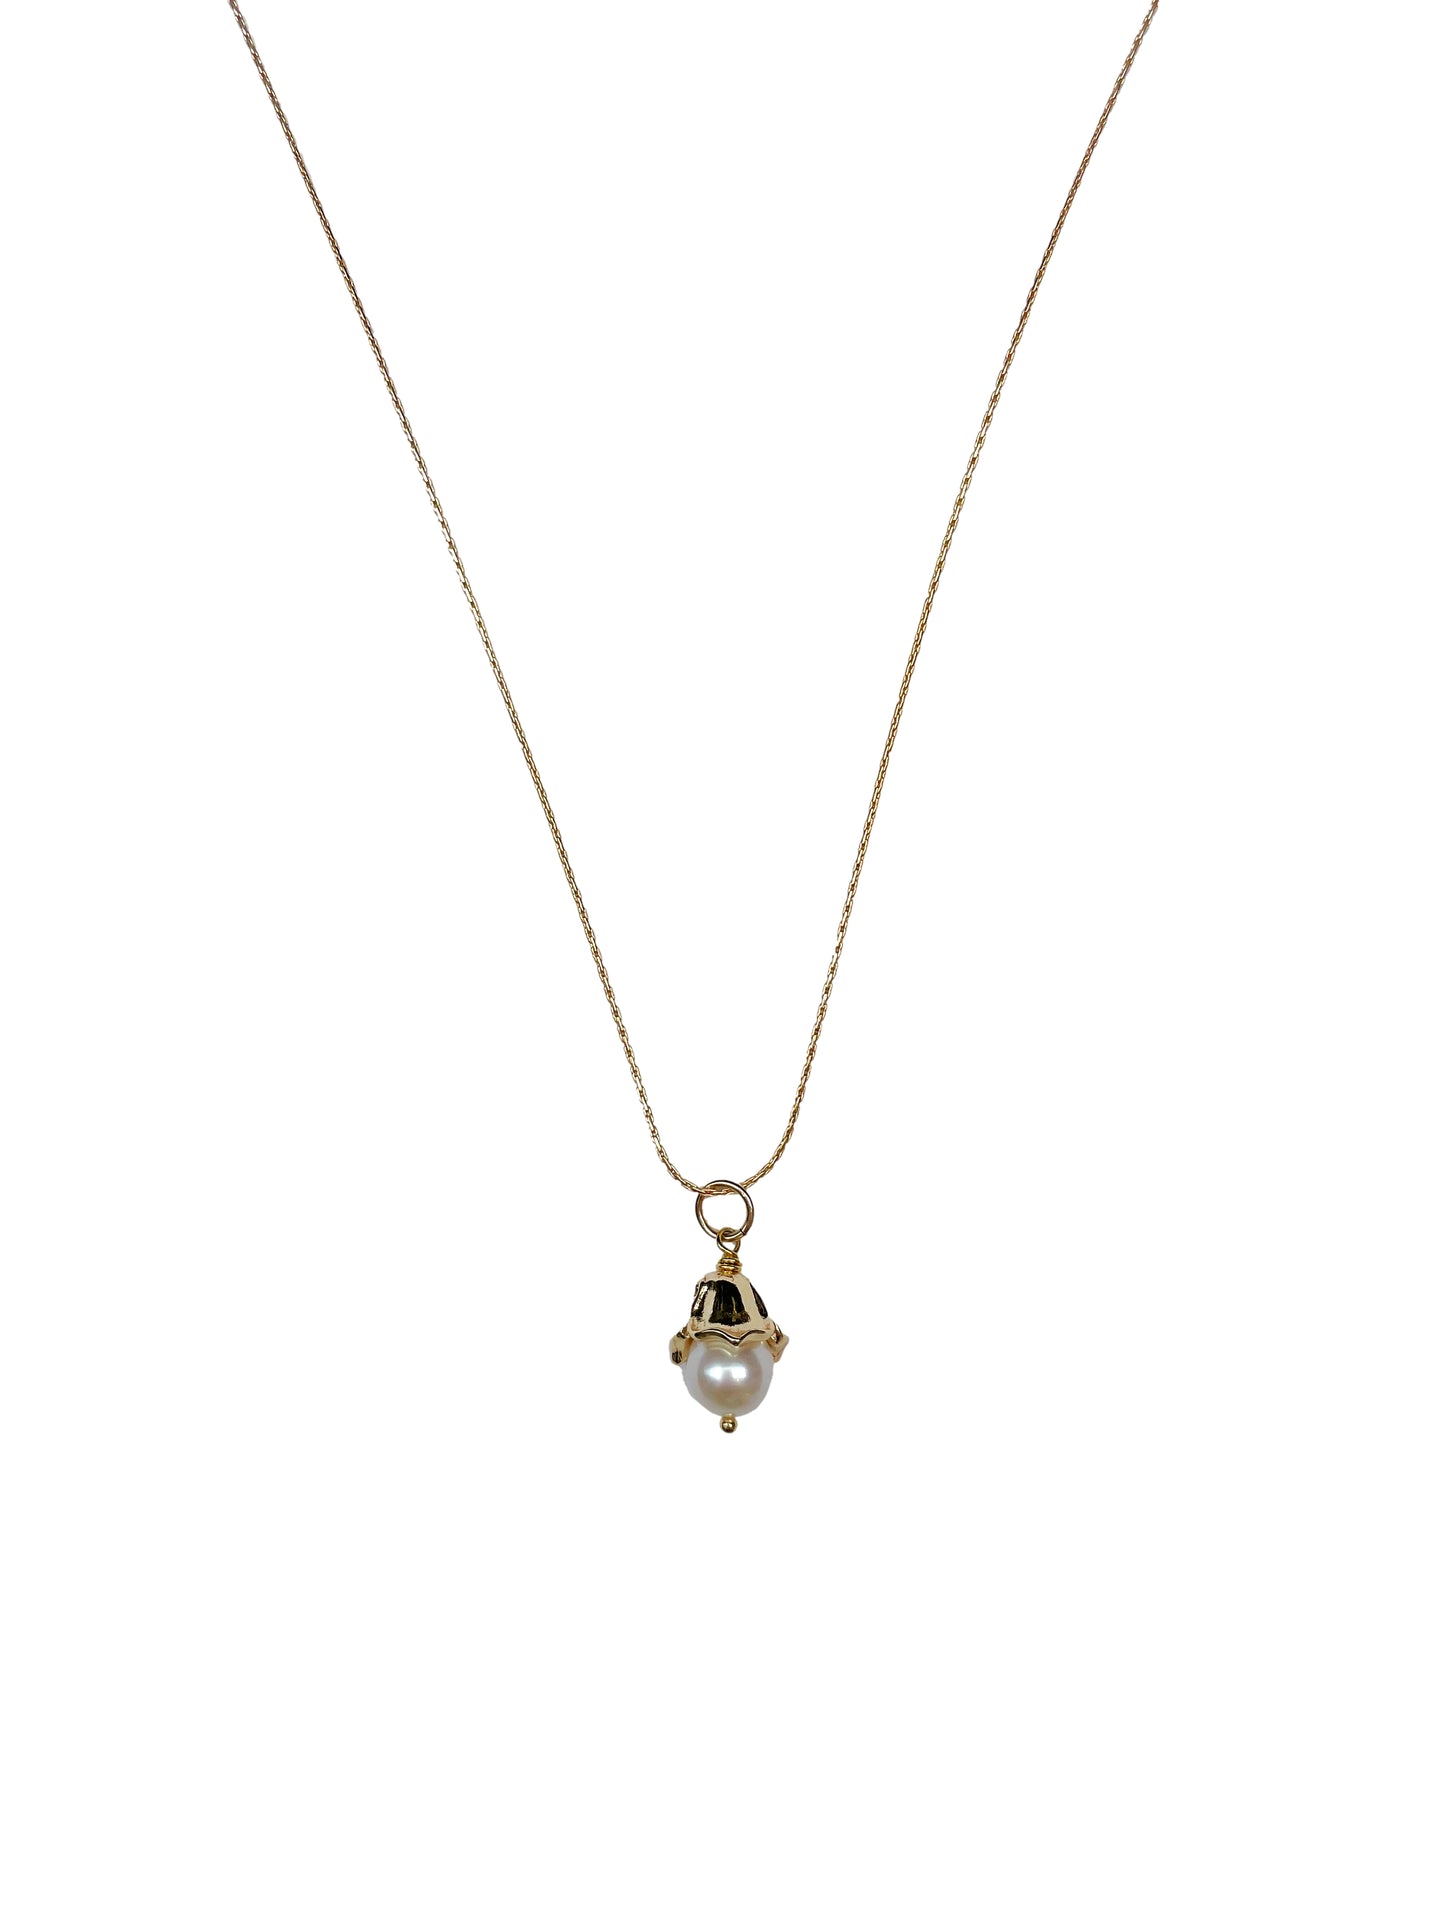 Reign Pendent Necklace